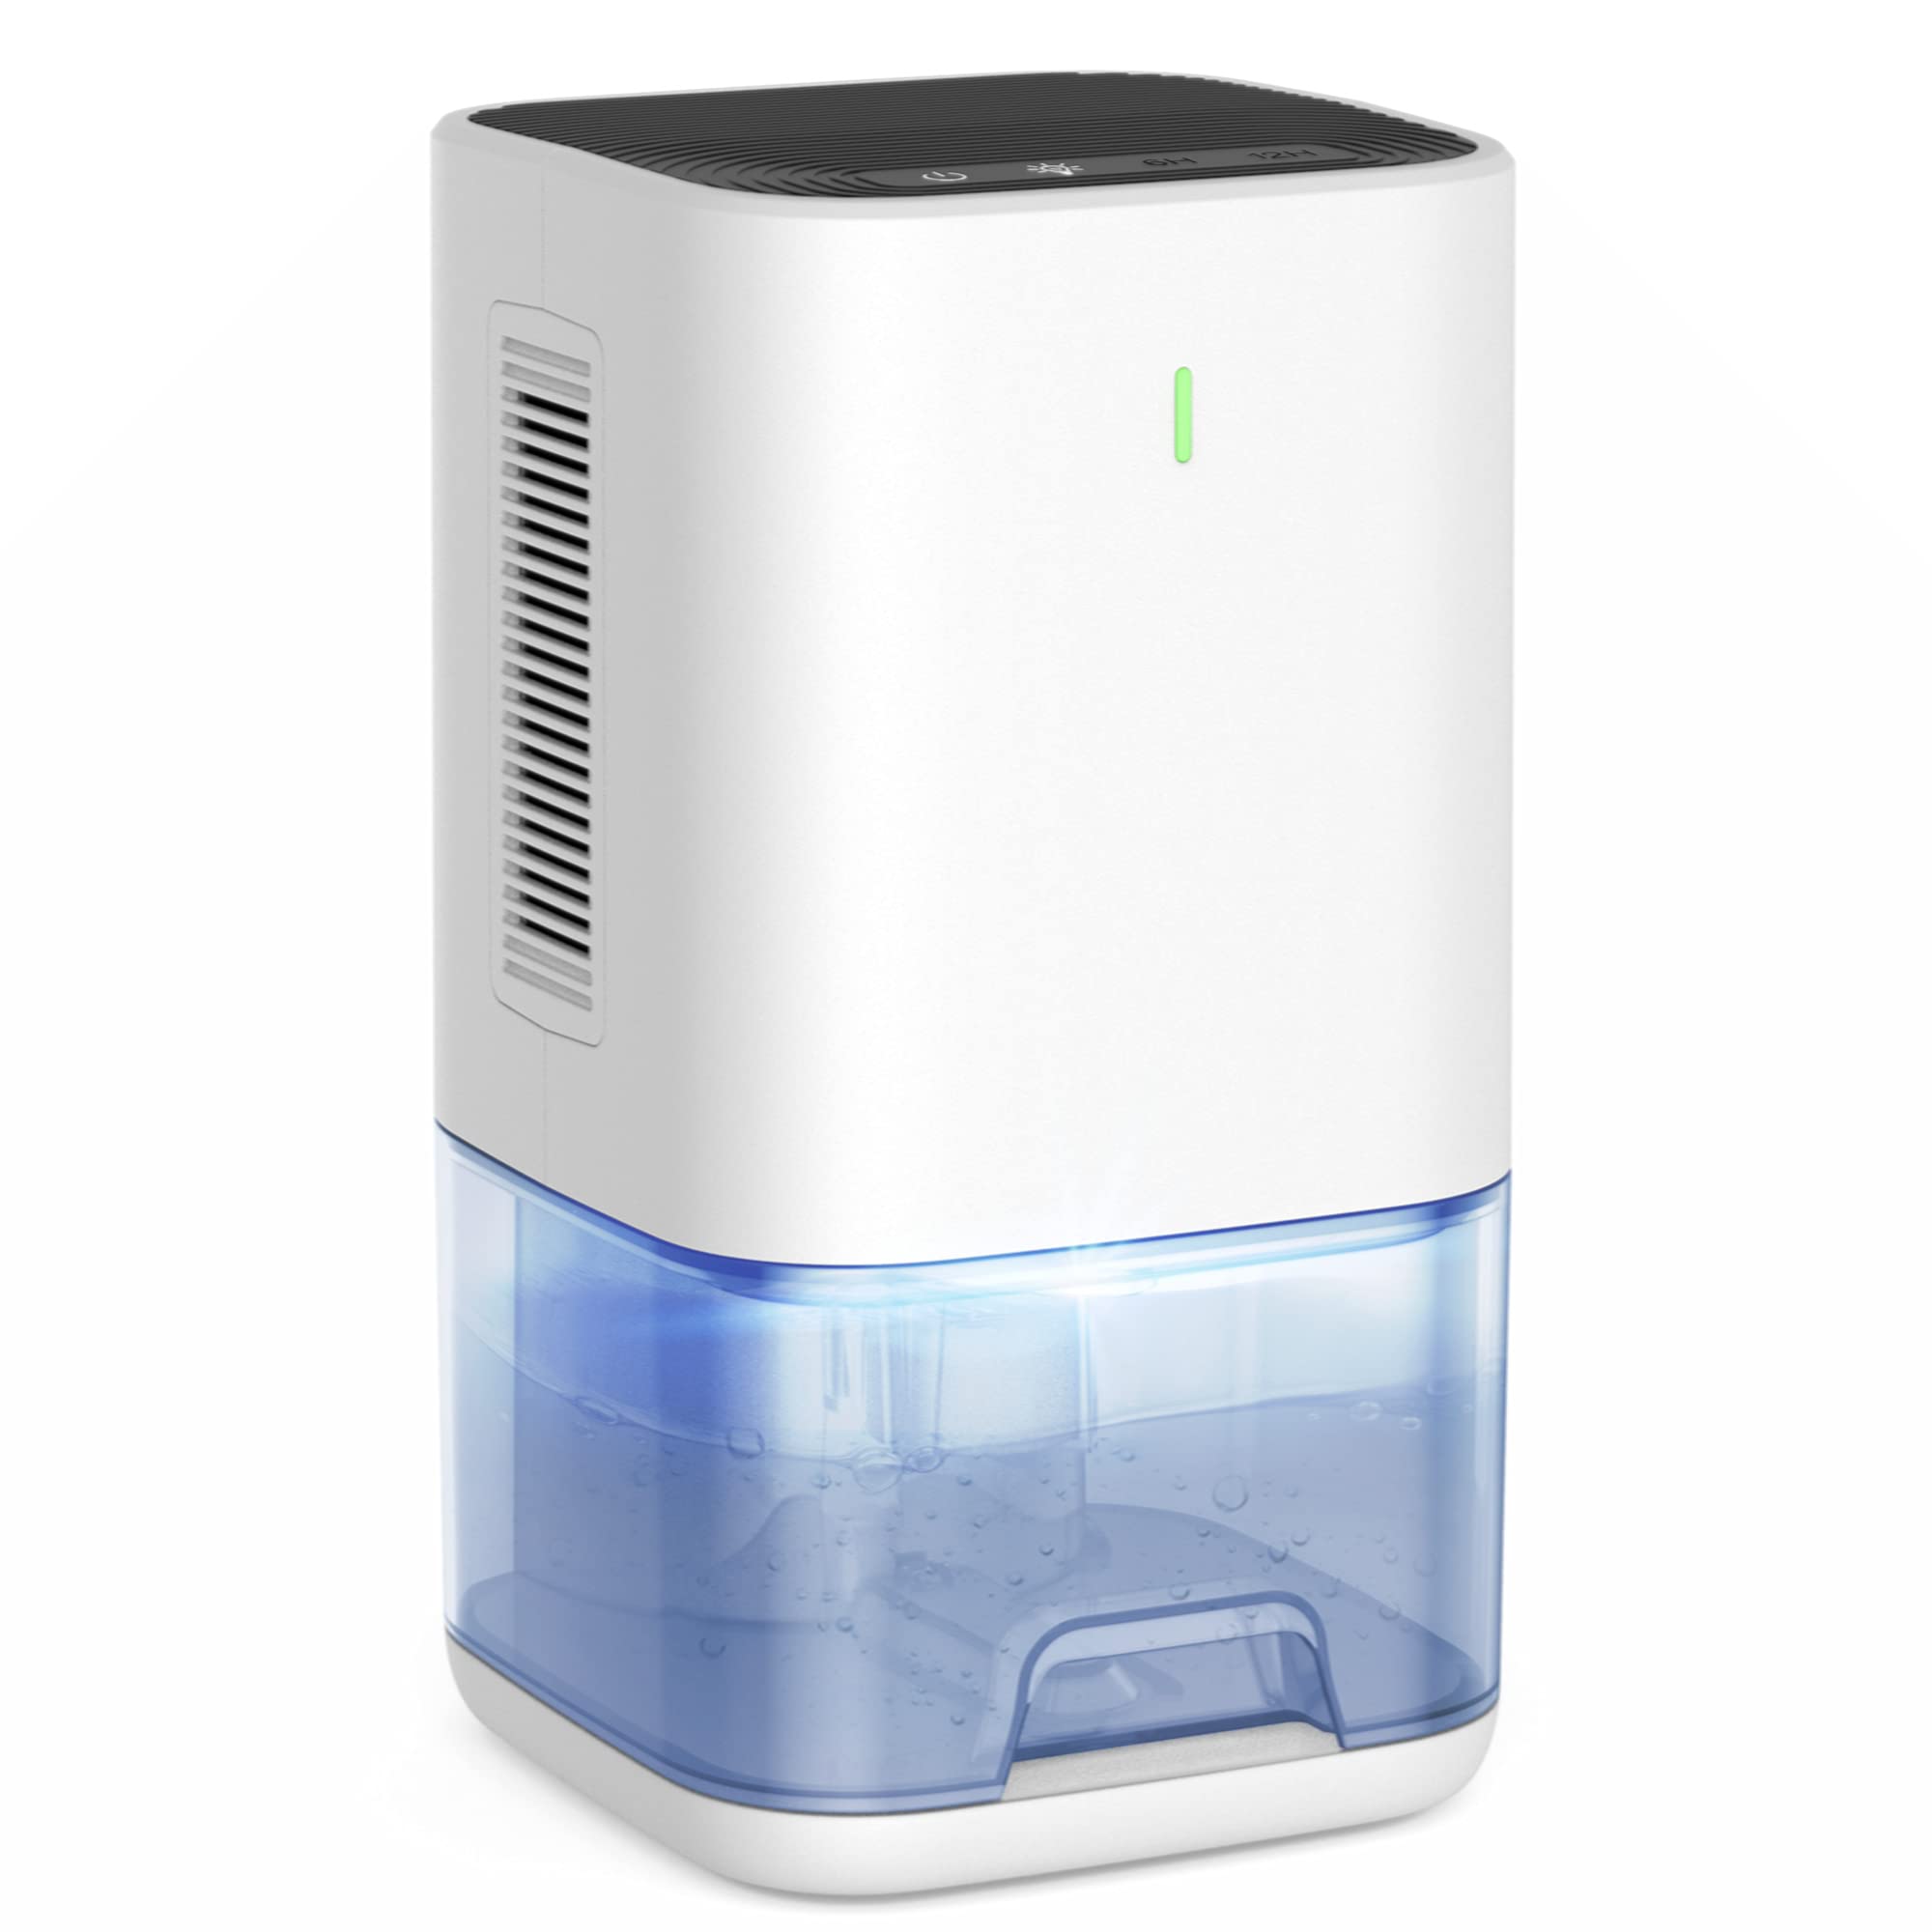 What Is The Quietest Dehumidifier On The Market